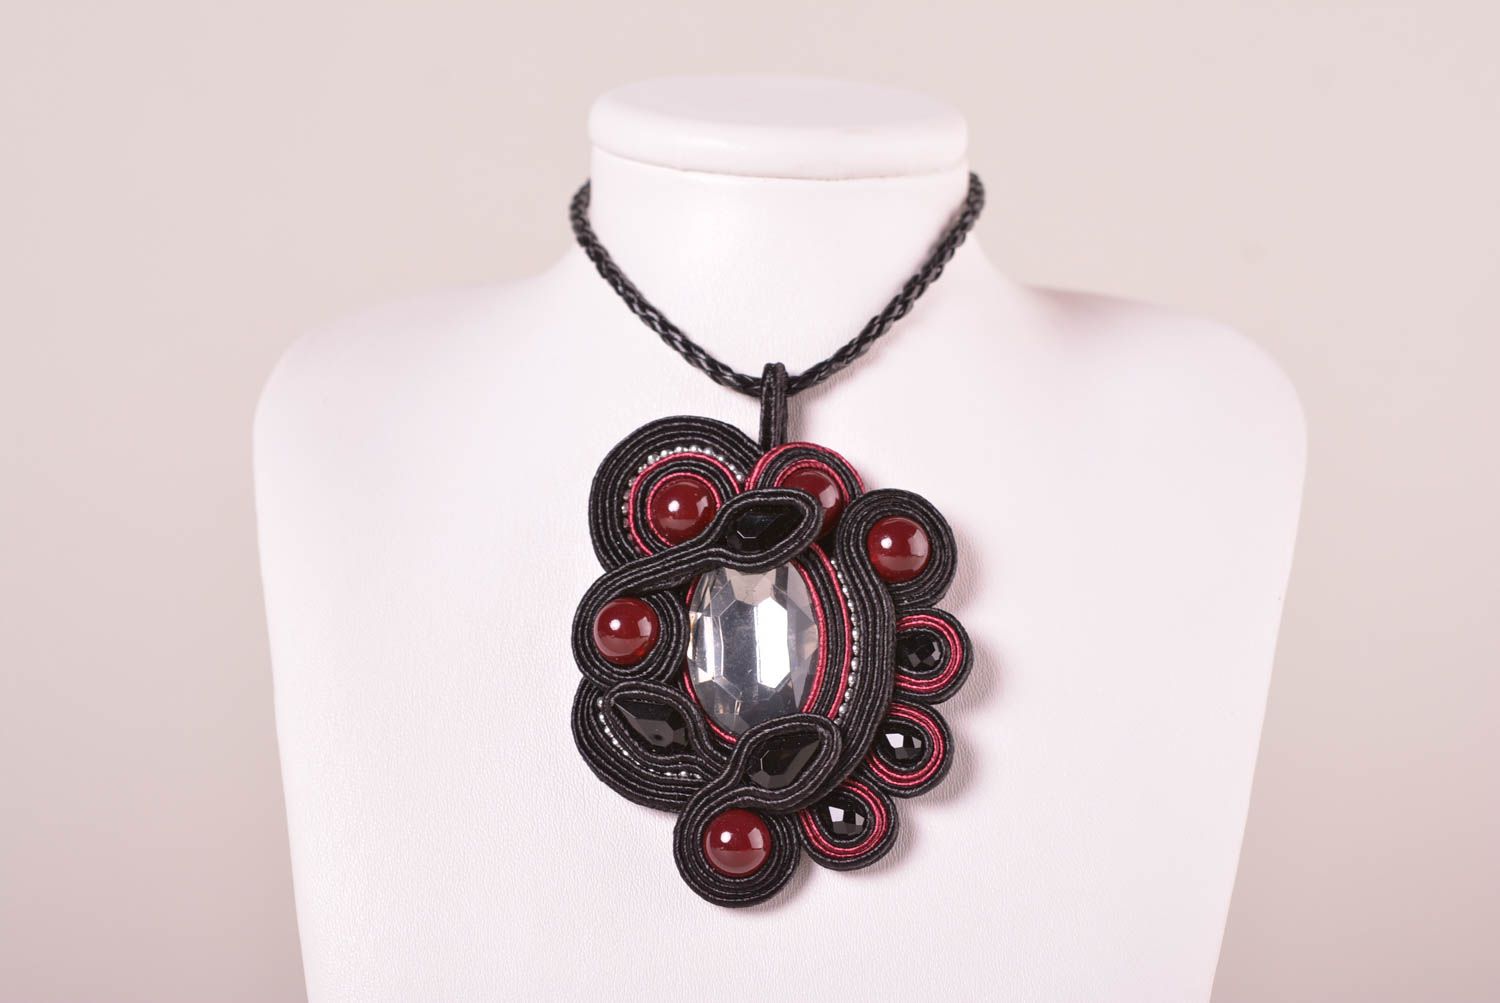 Handmade necklace soutache pendant necklace designer jewelry gifts for women photo 2